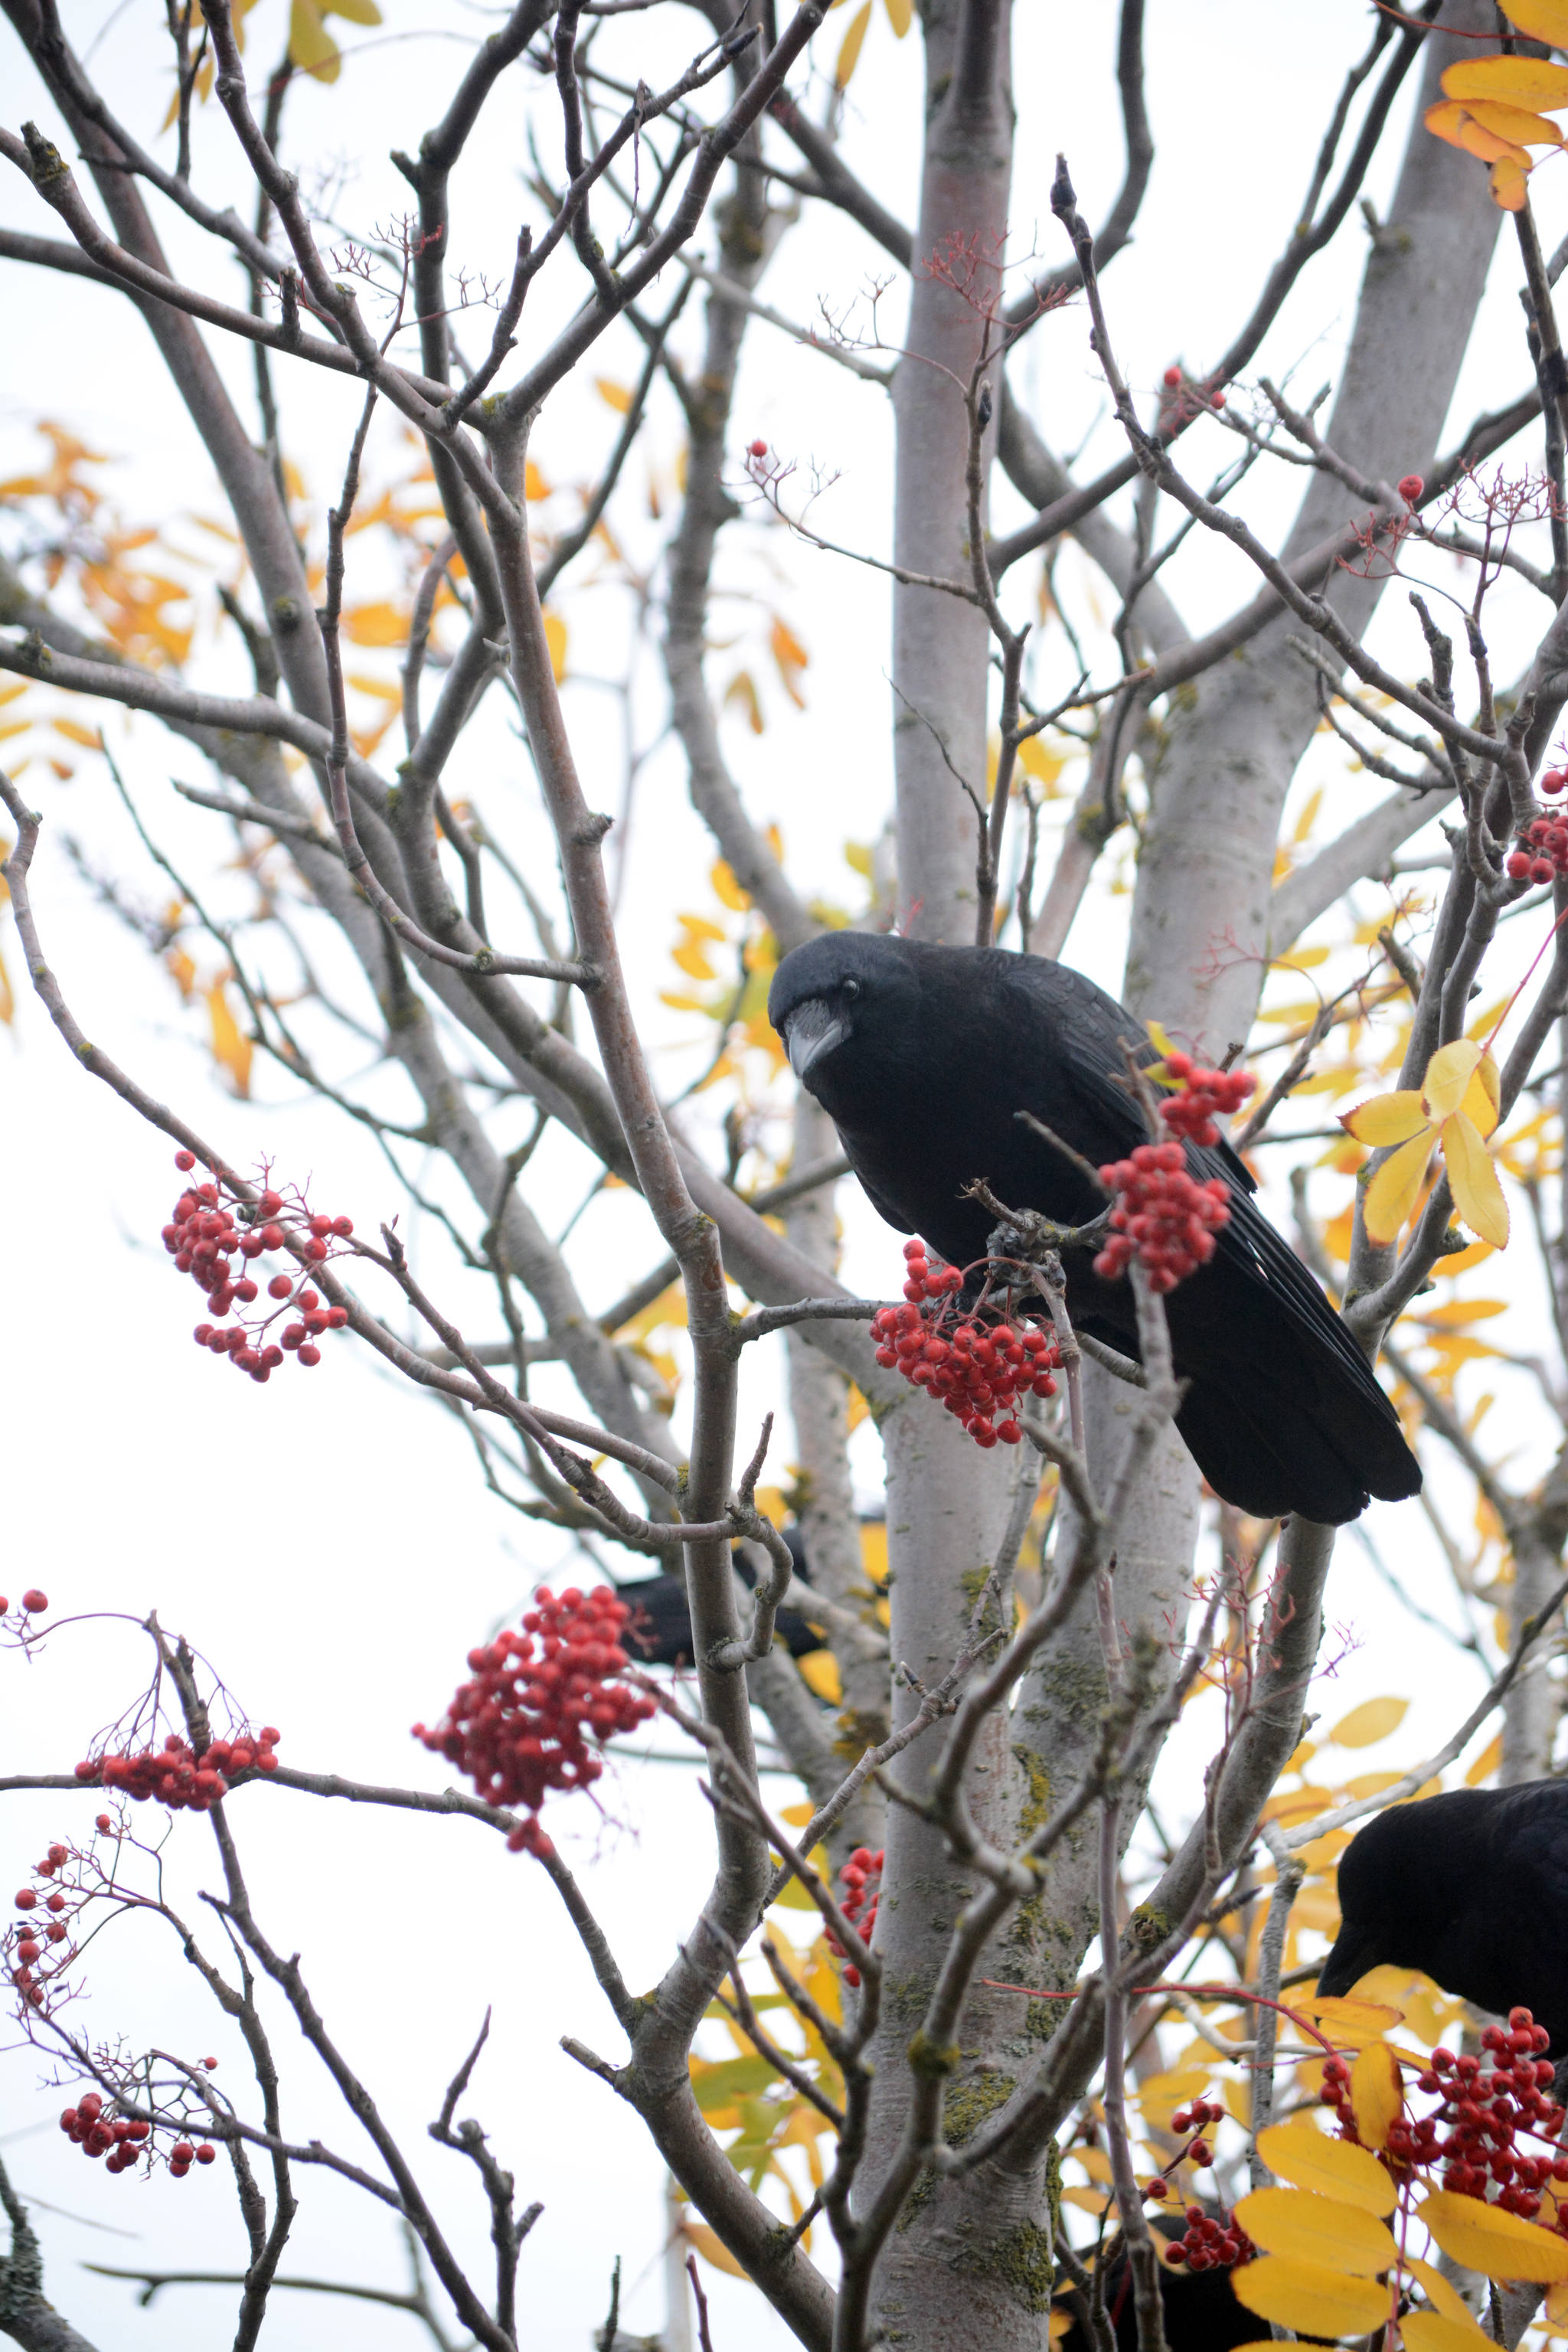 Crows feed on mountain ash berries along Lake Street on Tuesday afternoon, Oct. 9, 2018, in Homer, Alaska. (Photo by Michael Armstrong/Homer News)